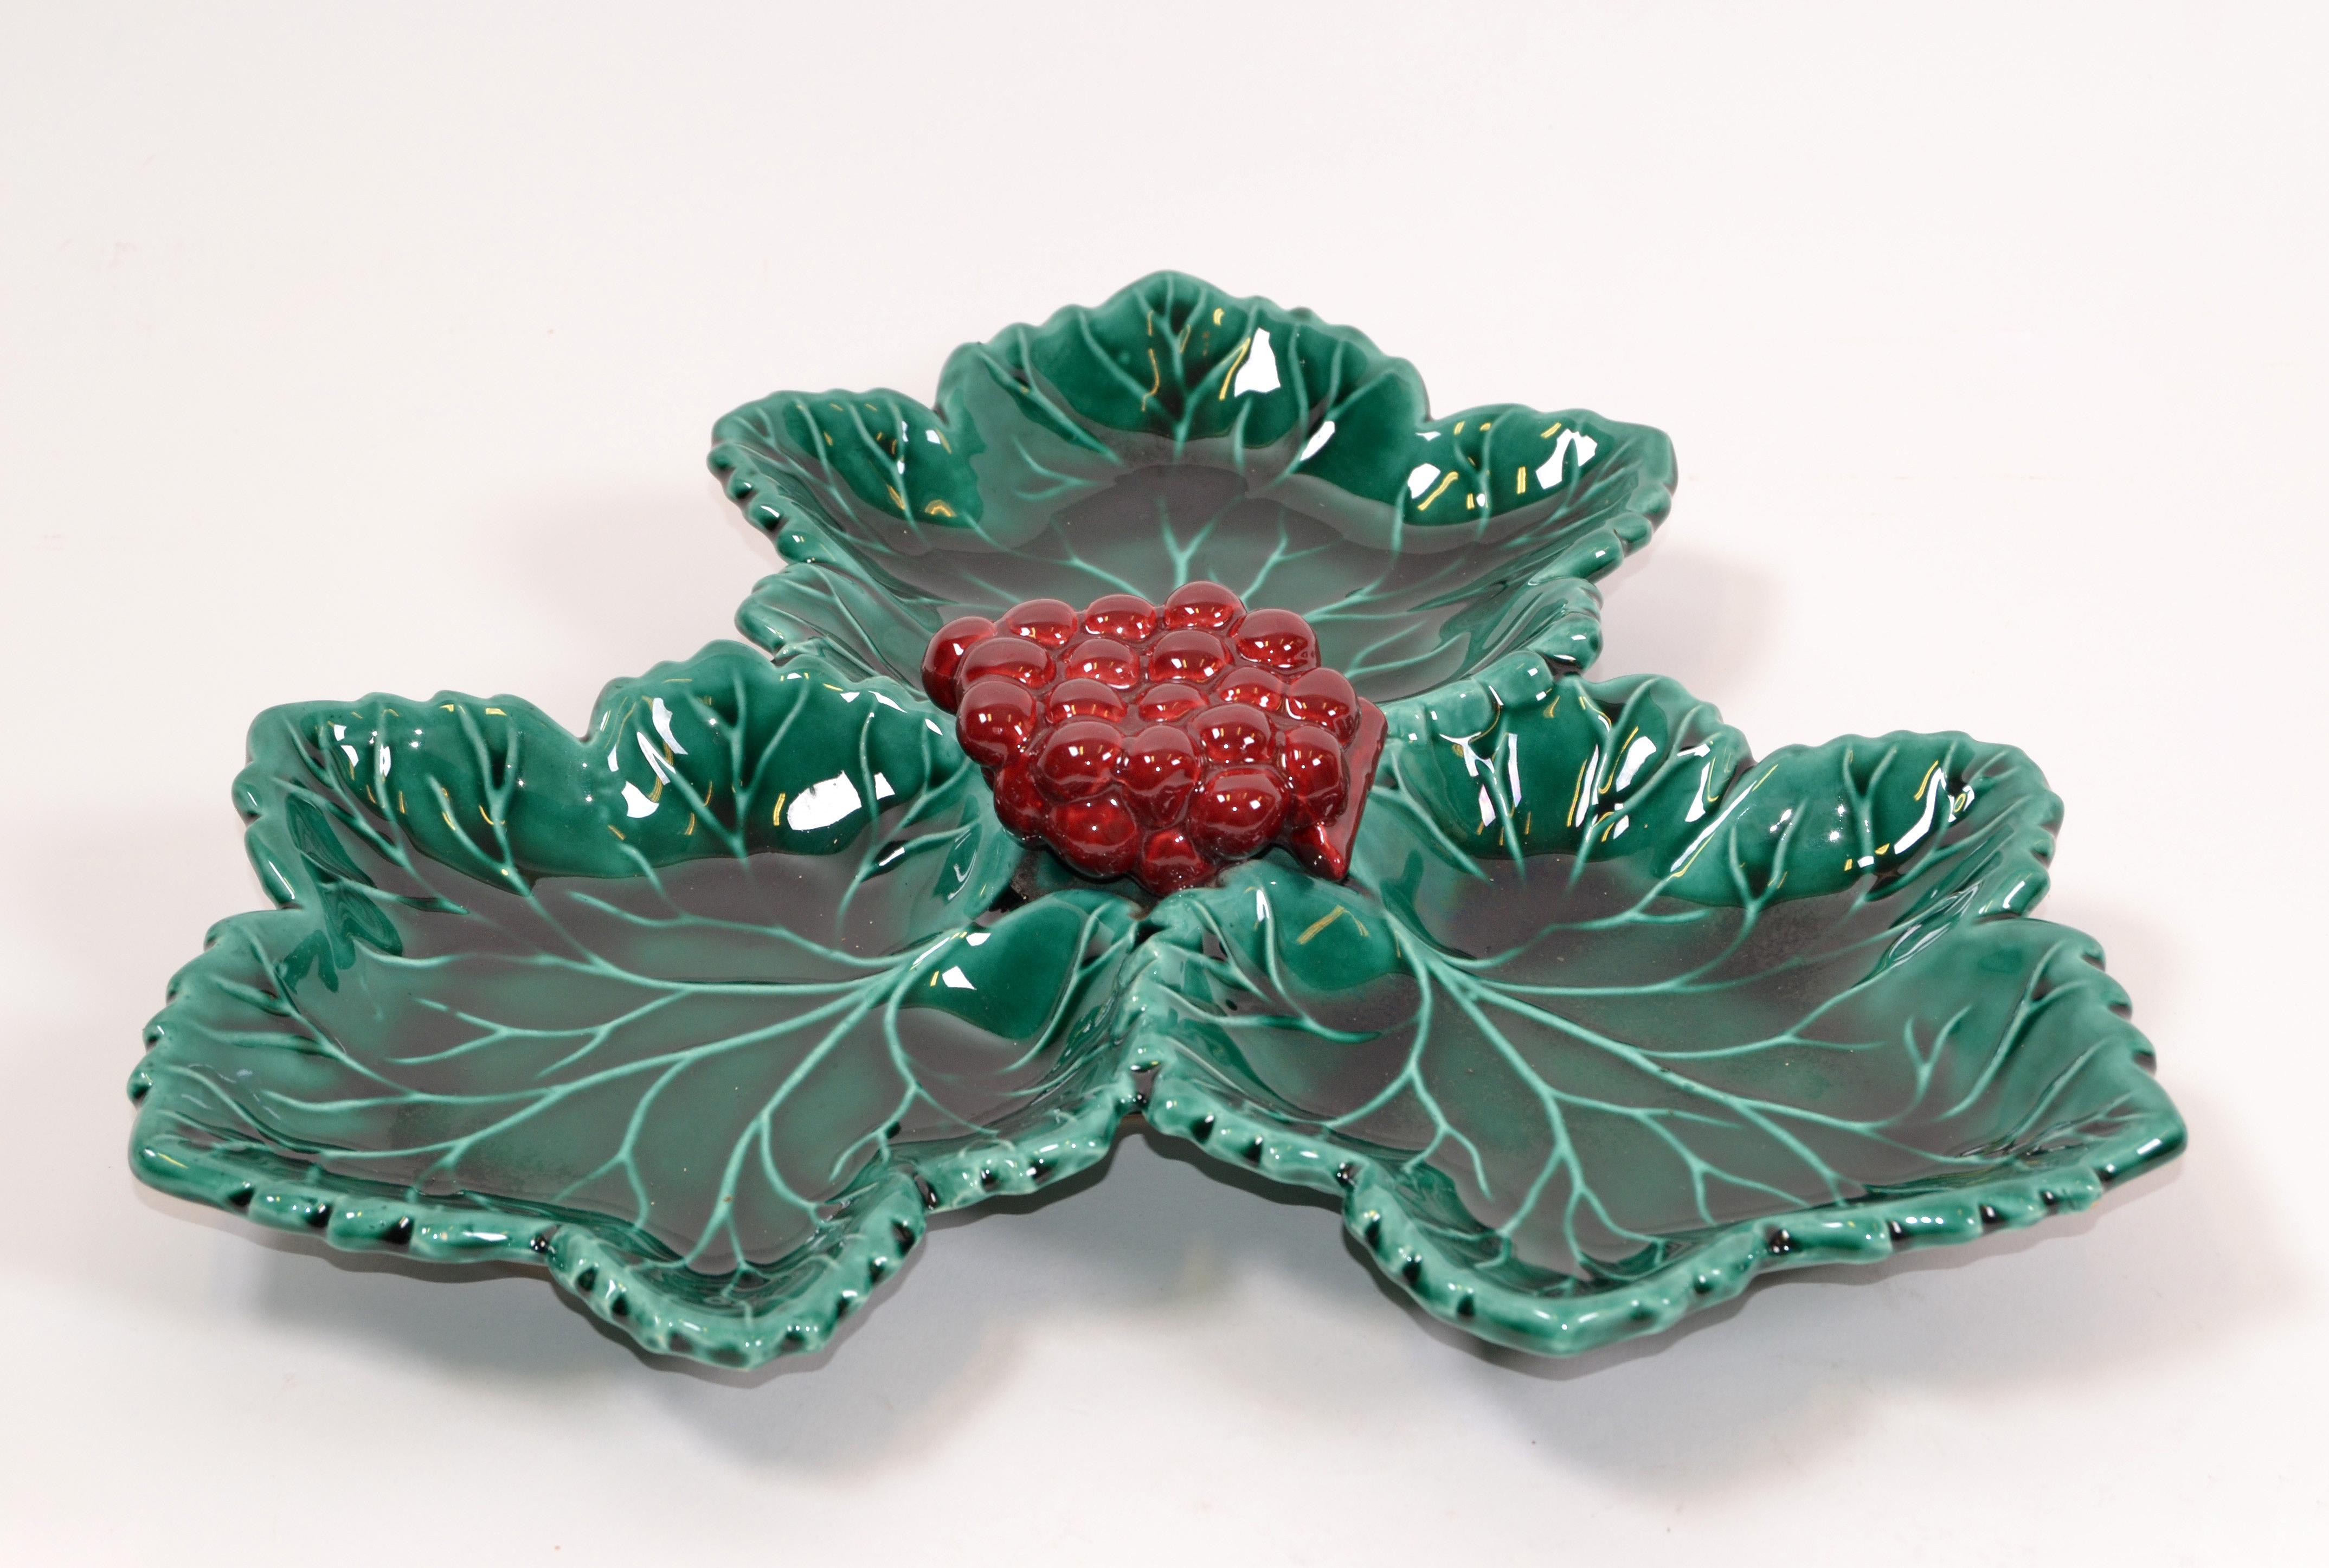 French Mid-Century Modern glazed grapes and vine leaves ceramic, pottery serving plate in emerald green and red from Vallauris (small village on the French Riviera).
Marked at the Base and numbered 380.
Stunning attention to the grape vine details.